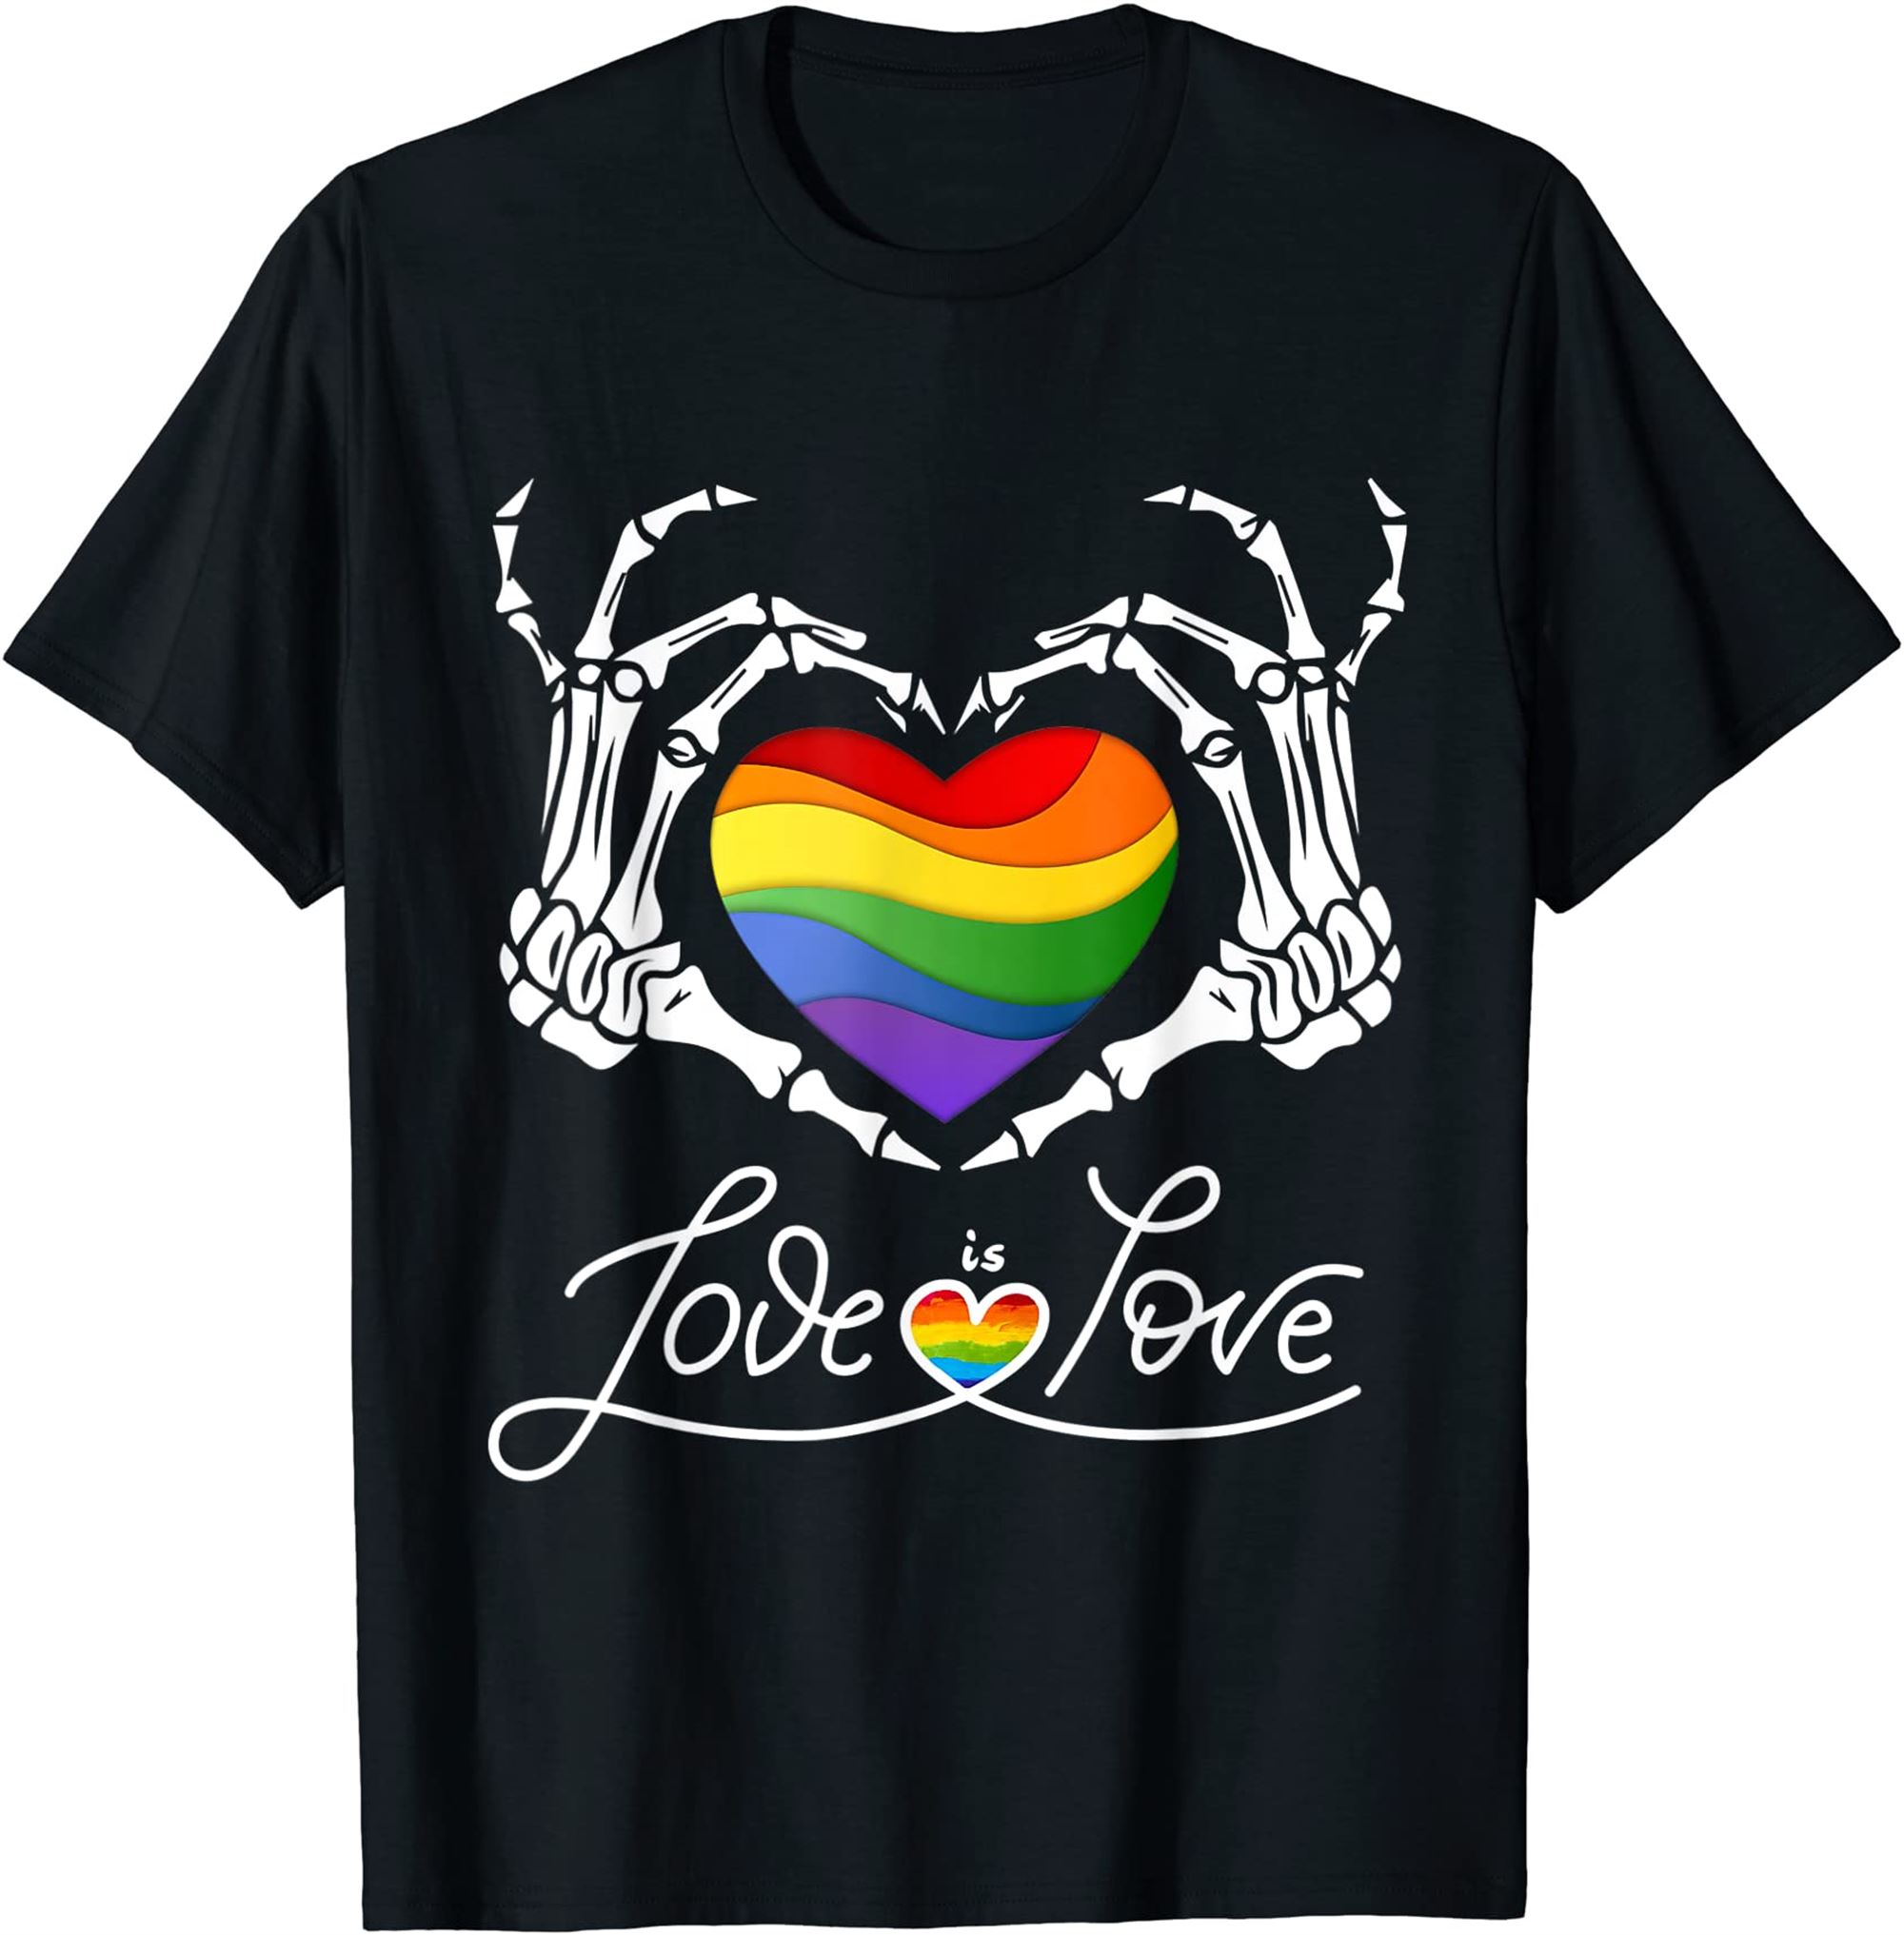 Rainbow Skeleton Heart Love Is Love Lgbt Gay Lesbian Pride T-shirt Plus Size Up To 5xl